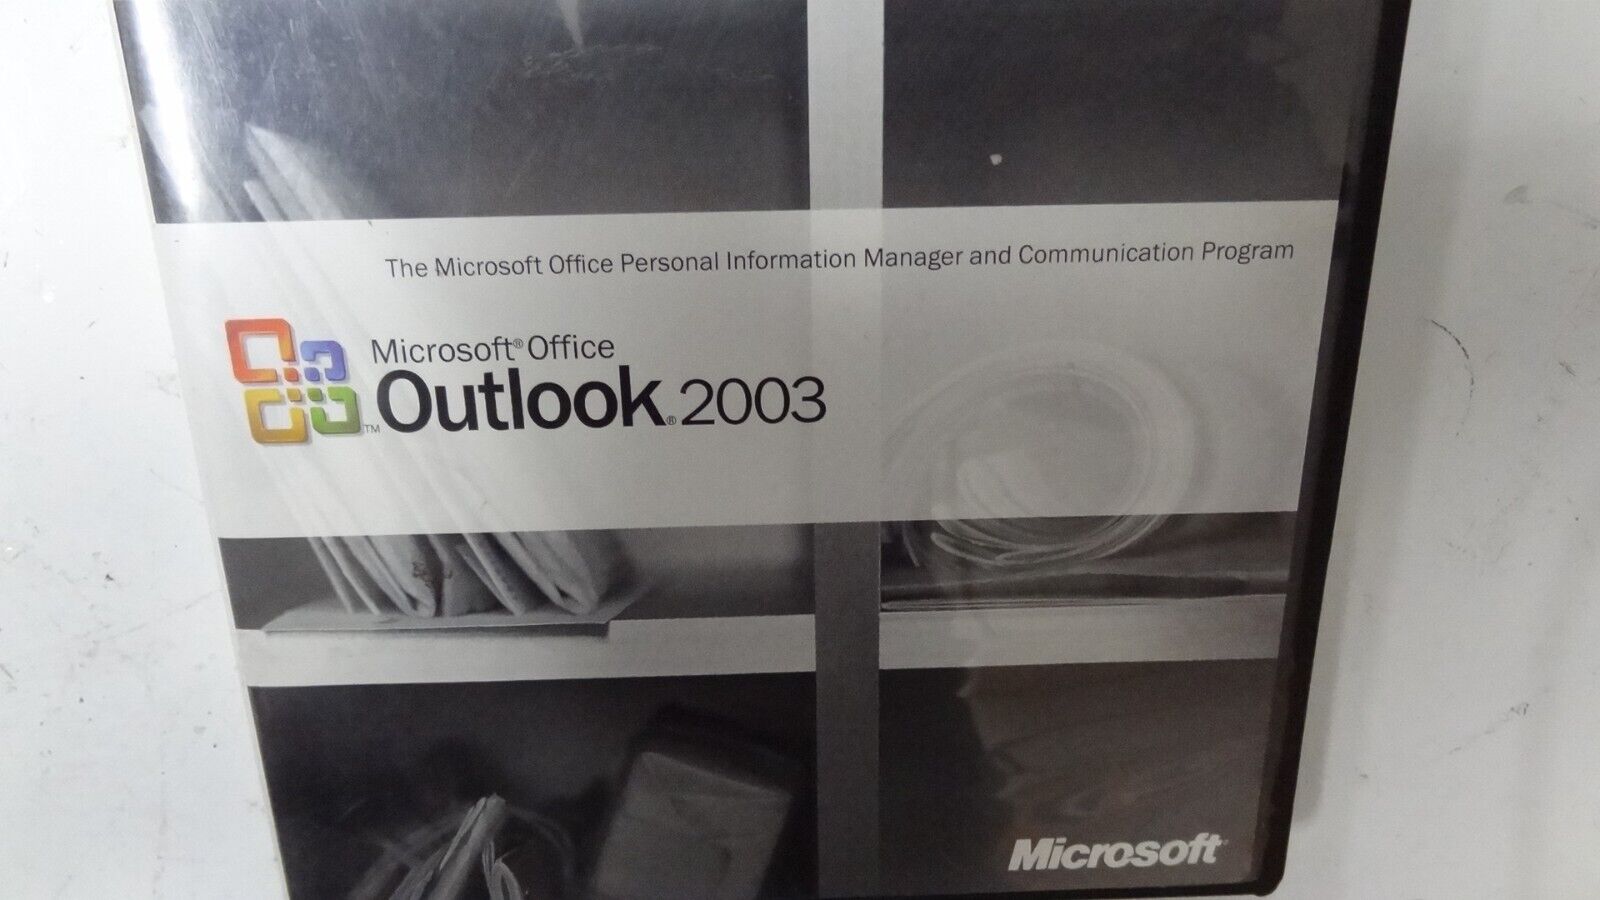 Microsoft Office Outlook 2003 Full Version w/Product Key & License  - NEVER USED